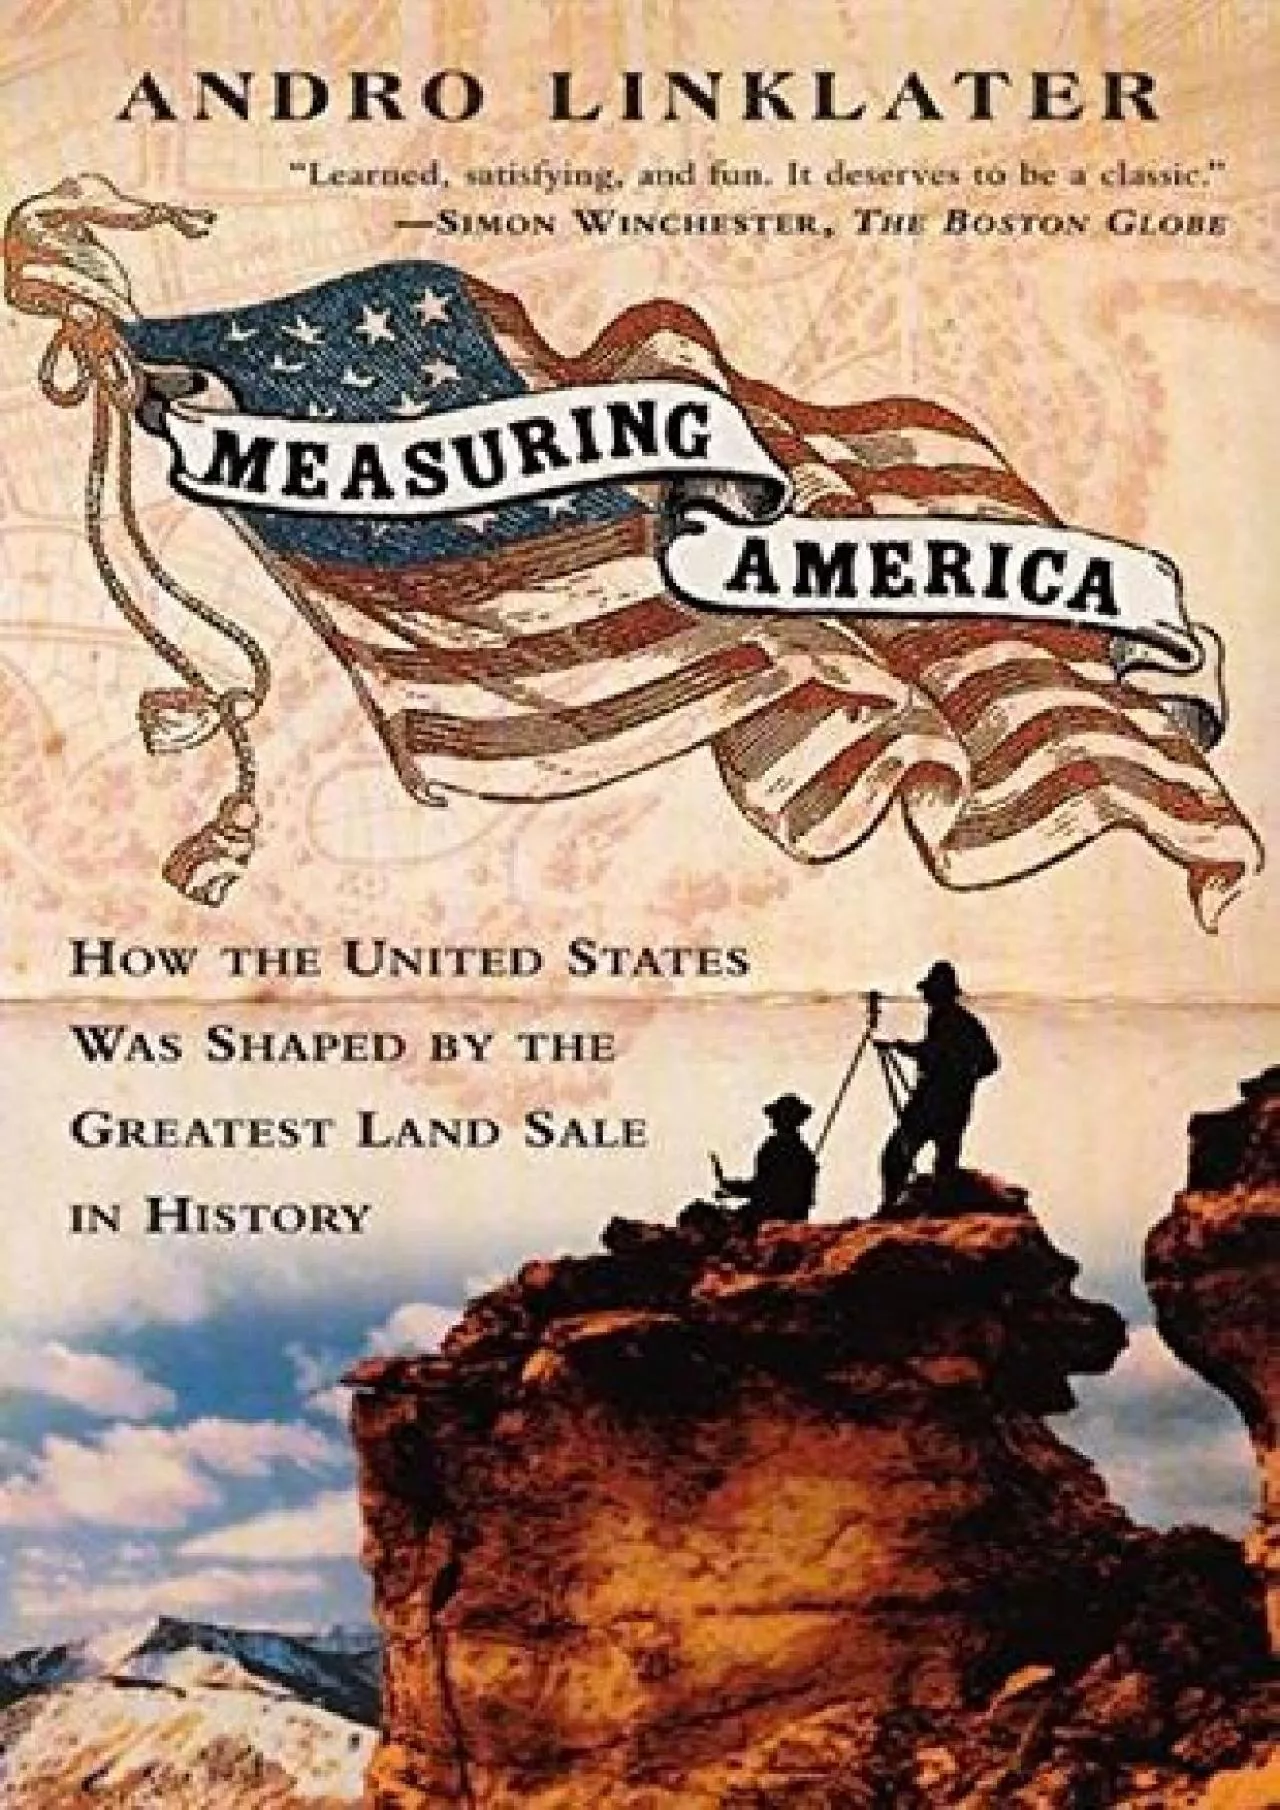 [DOWNLOAD]-Measuring America: How the United States Was Shaped By the Greatest Land Sale